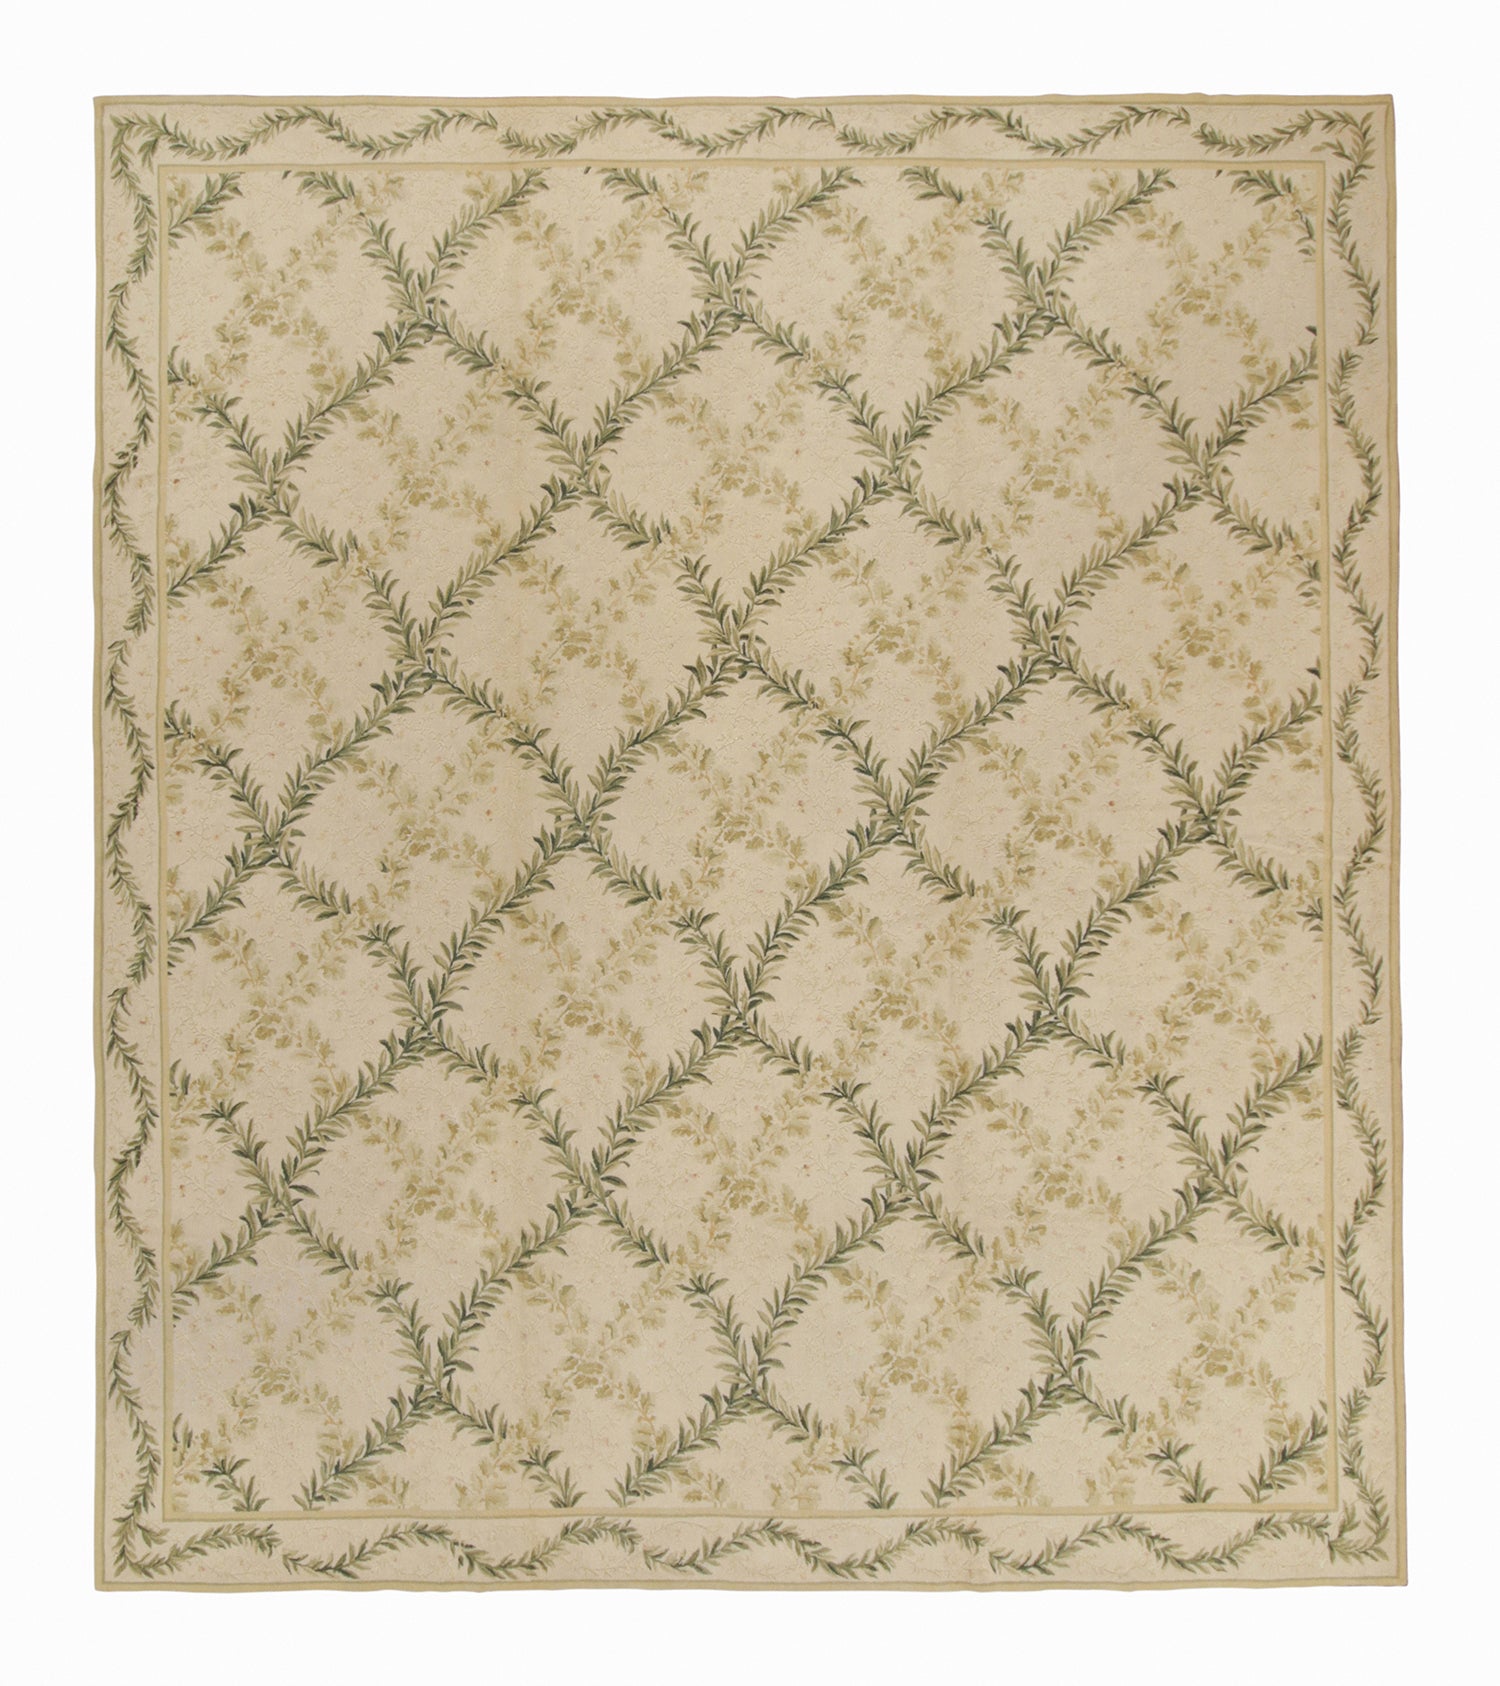 Rug & Kilim’s Tudor Style Flat Weave in Green and Cream Trellis Floral Patterns For Sale